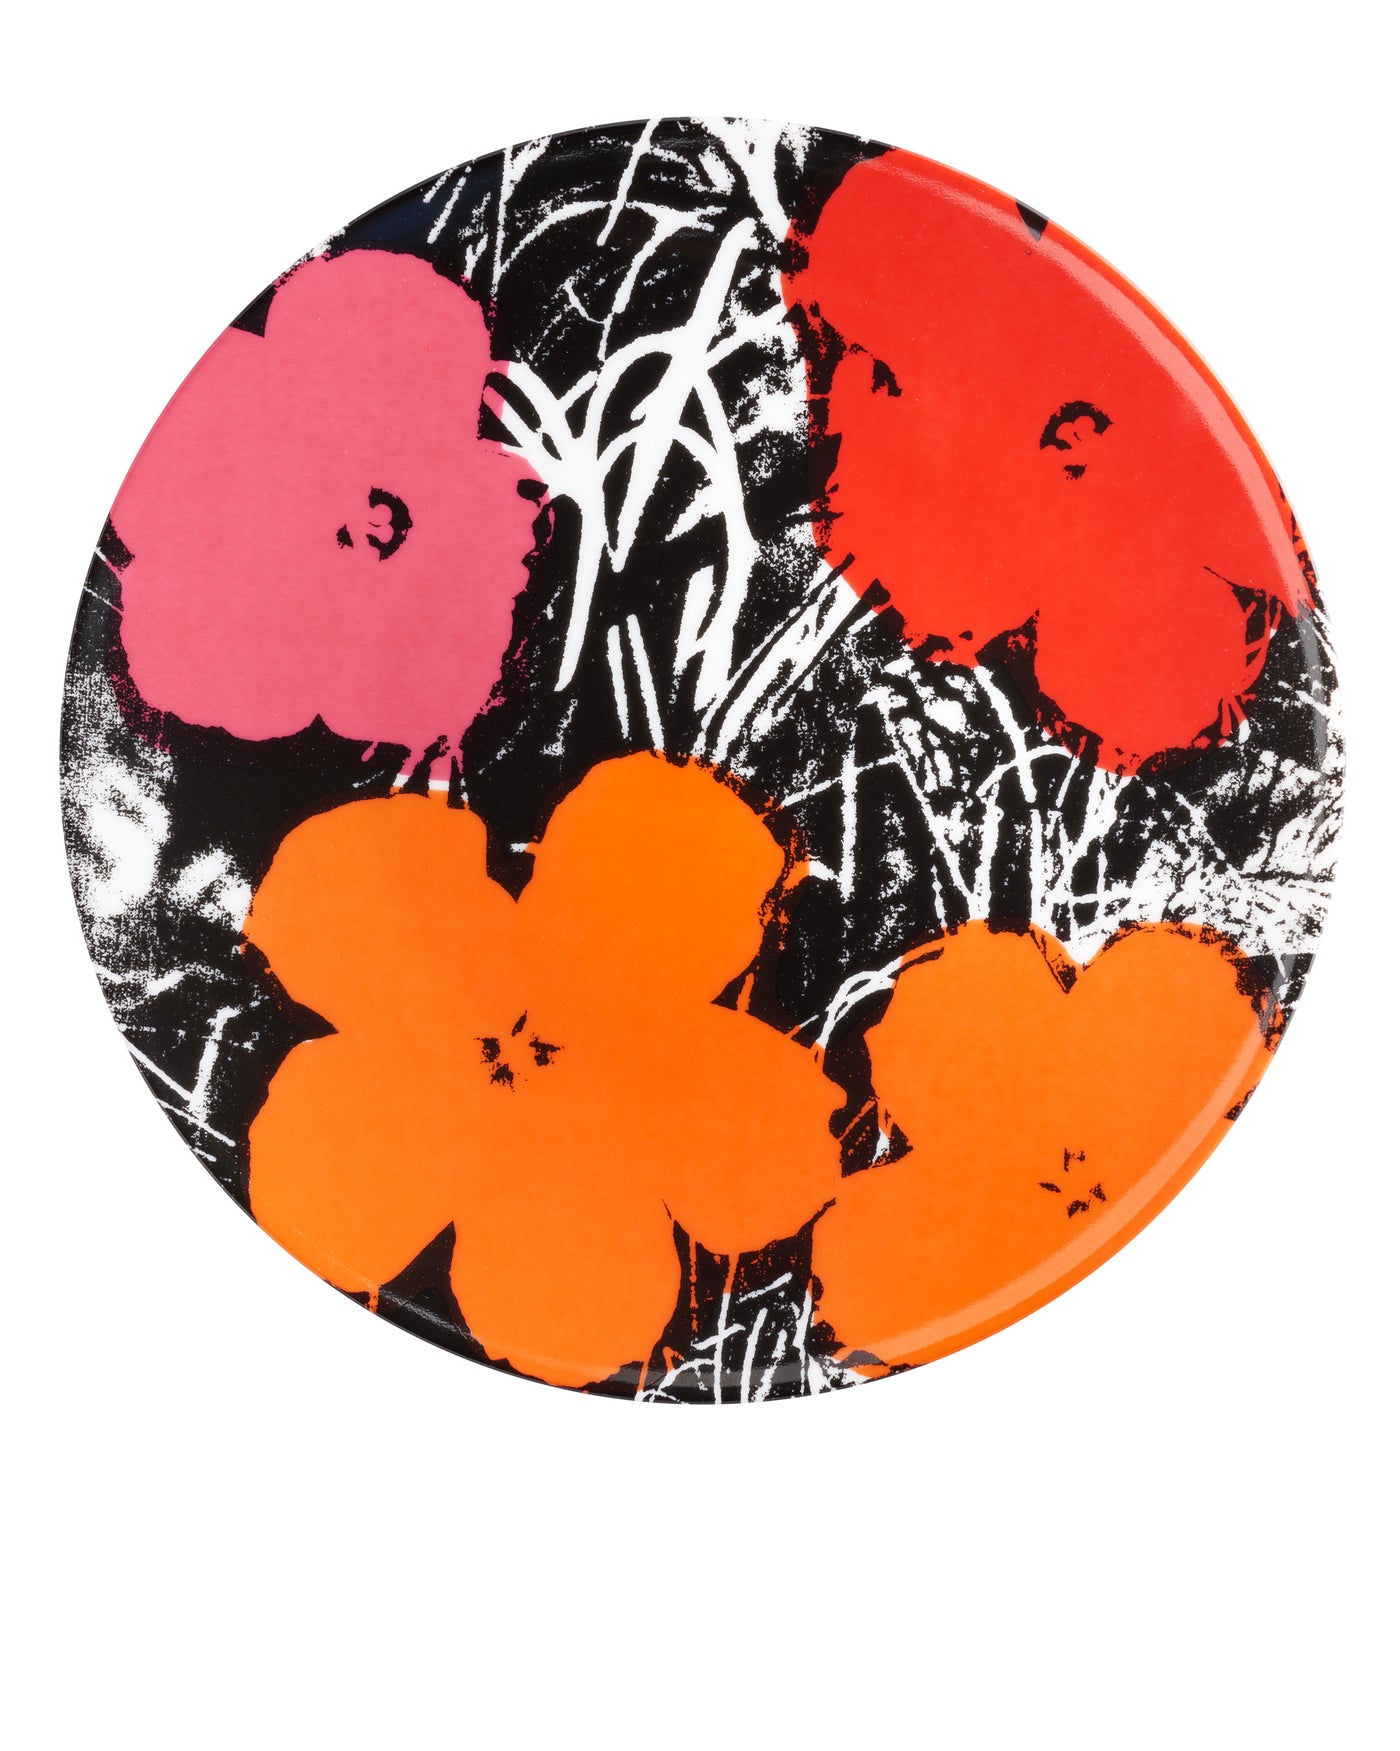 Andy Warhol Plate Flower Red/Pink